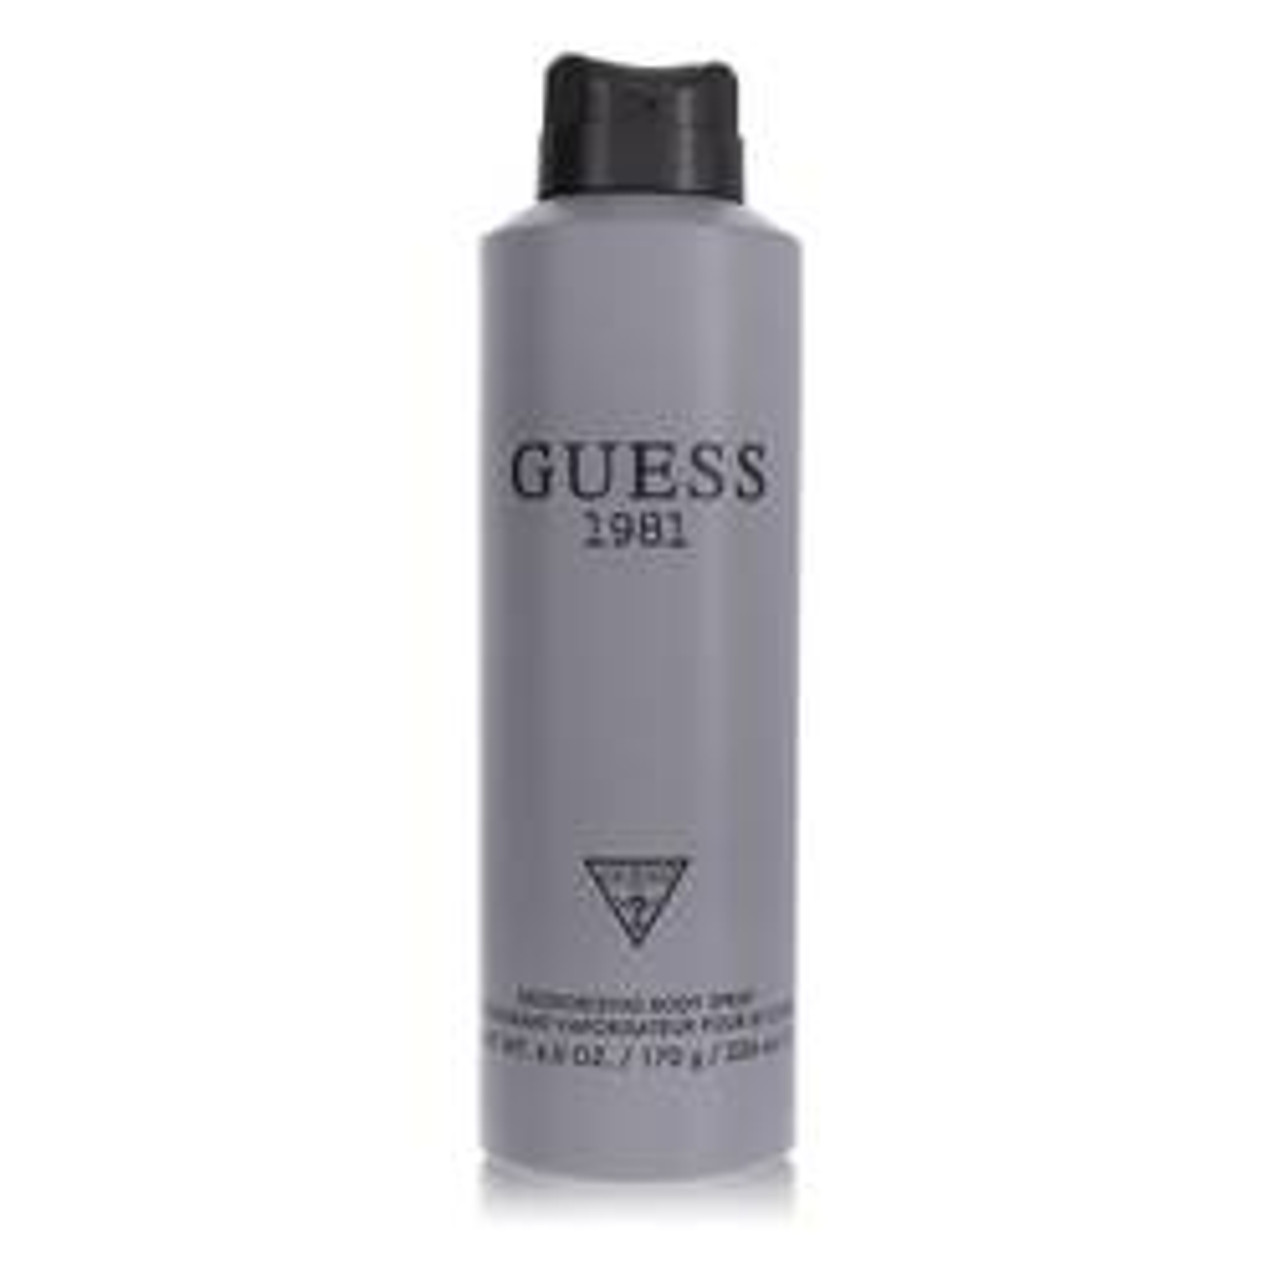 Guess 1981 Cologne By Guess Body Spray 6 oz for Men - [From 27.00 - Choose pk Qty ] - *Ships from Miami